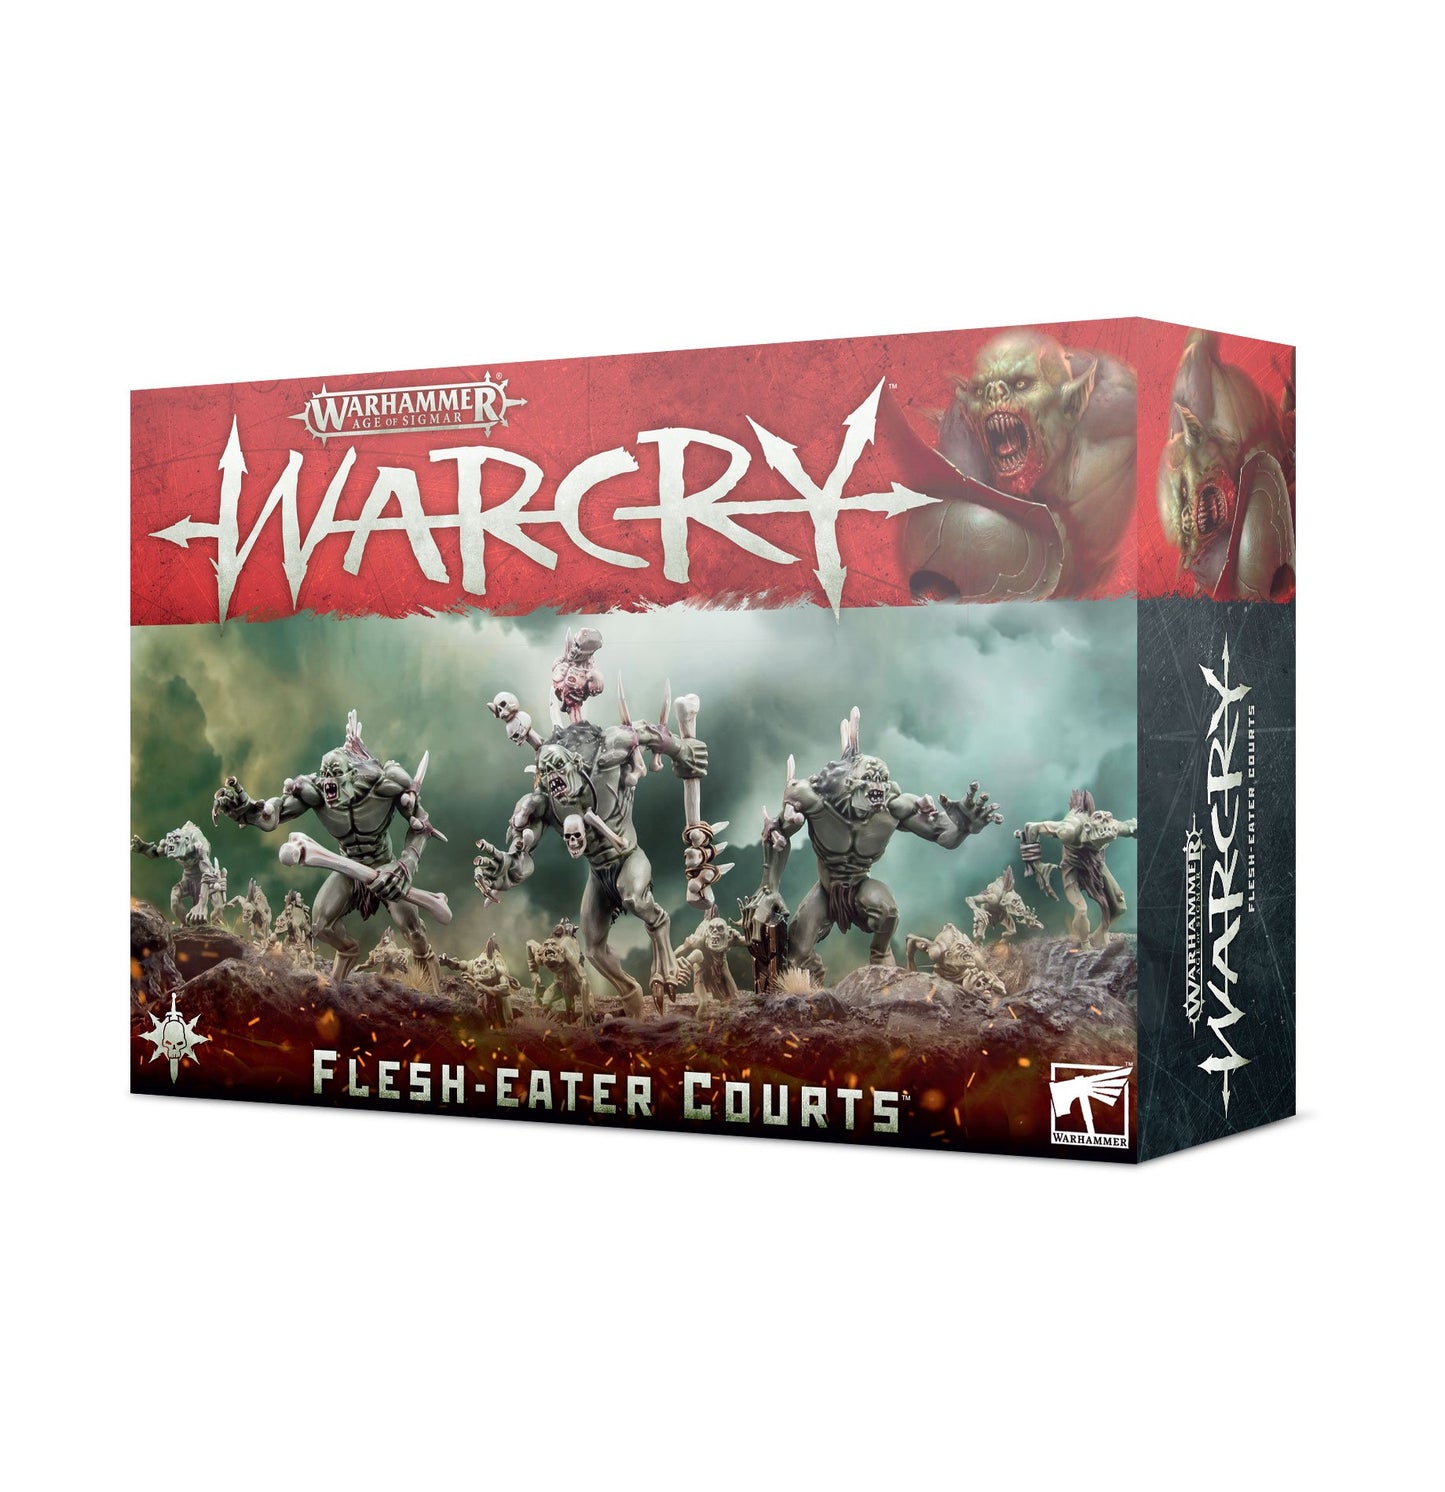 Warhammer Warcry: Flesh-Eater Courts